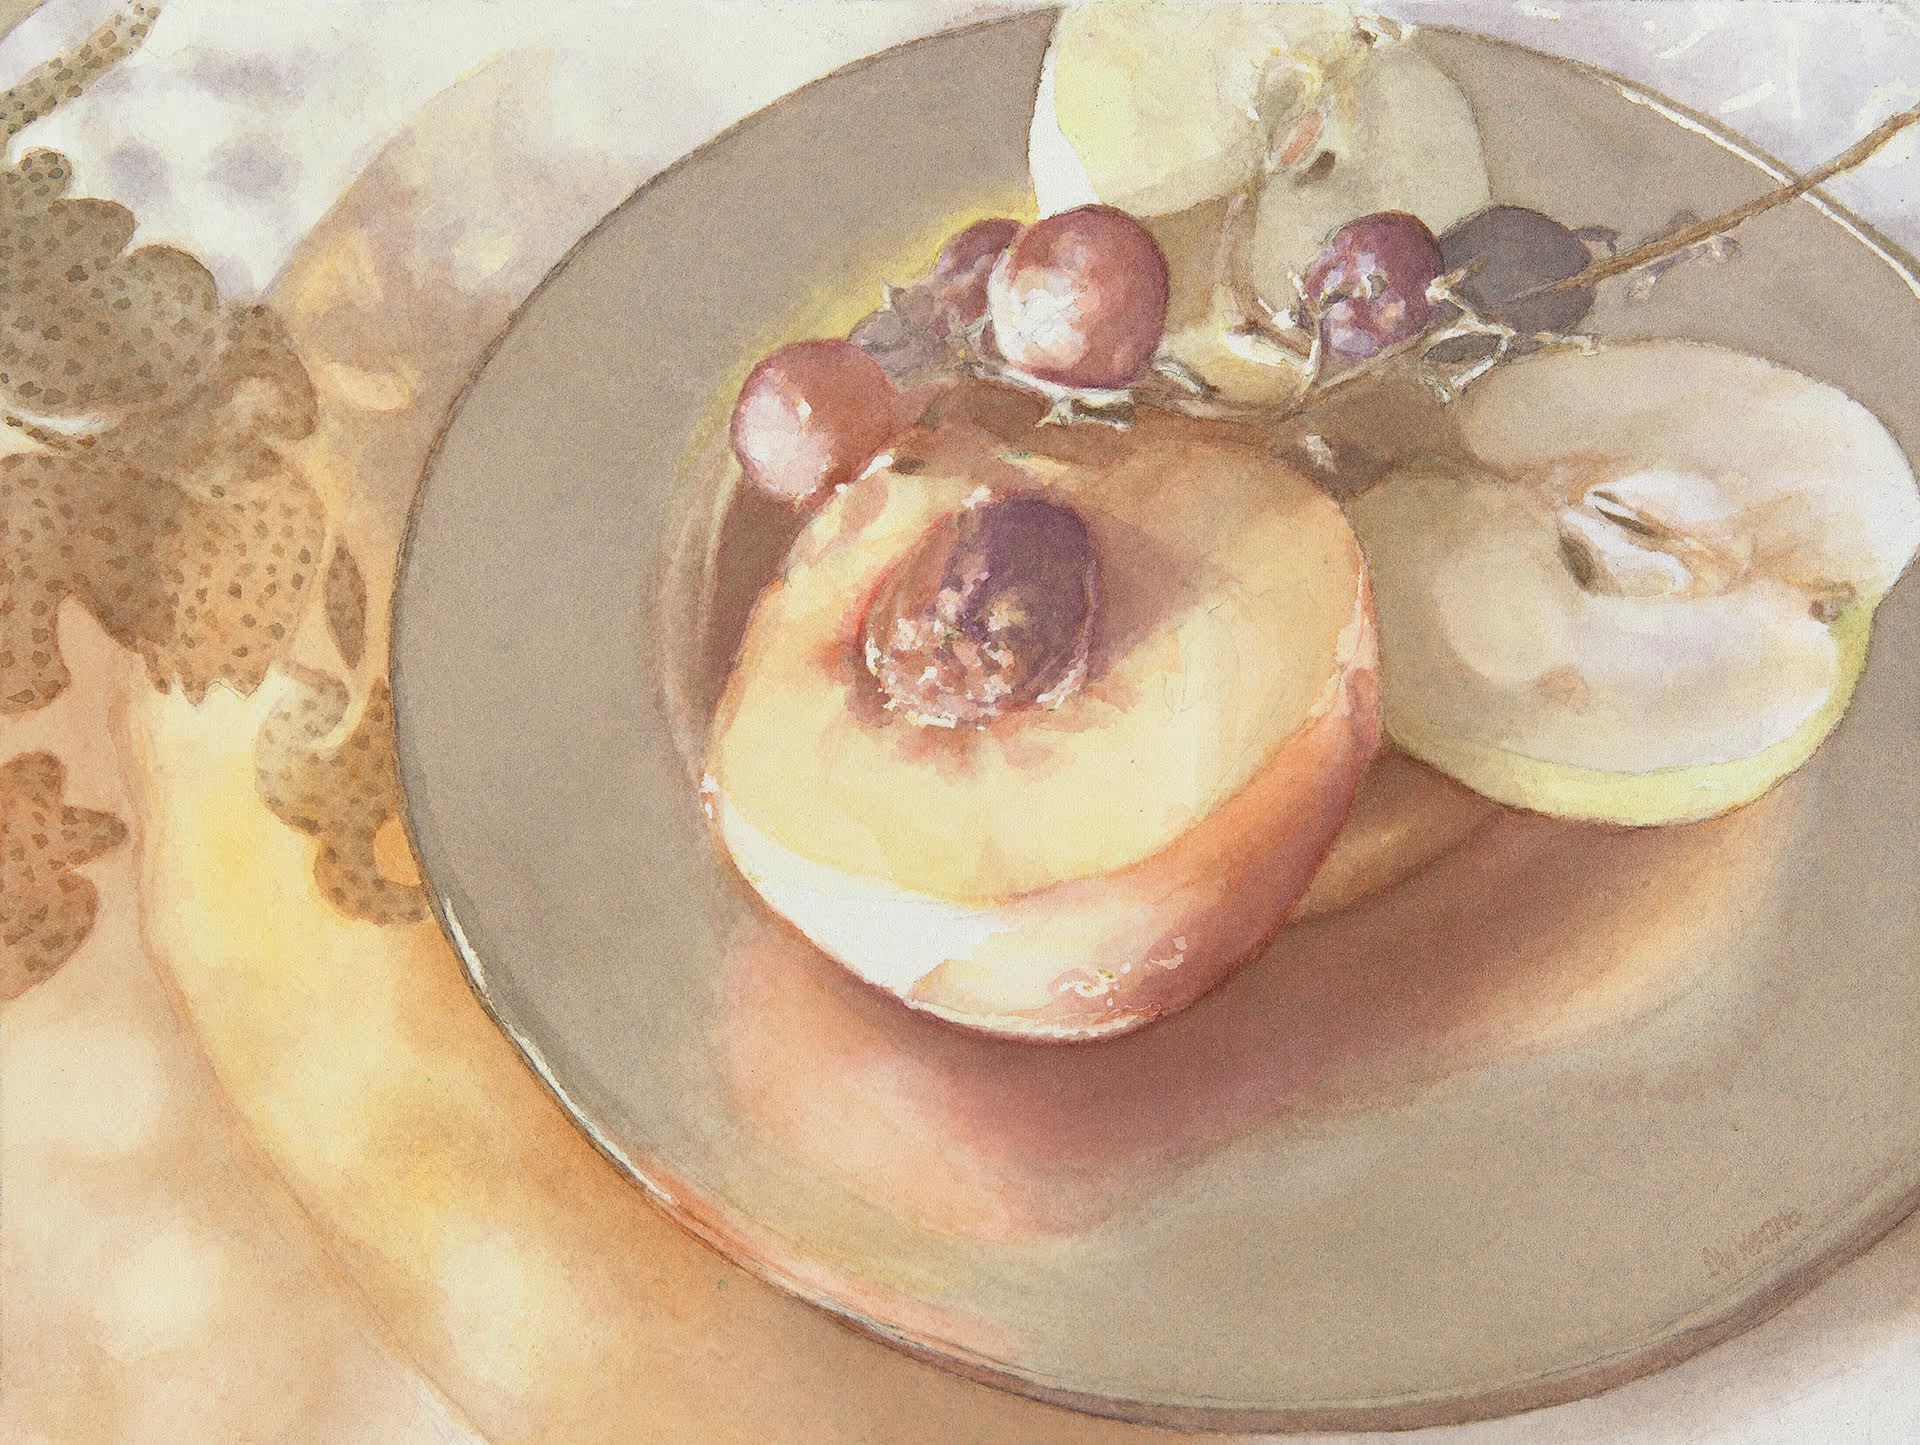 Watermedia painting by D. Keane, fruit on a golden plate in soft warm tones